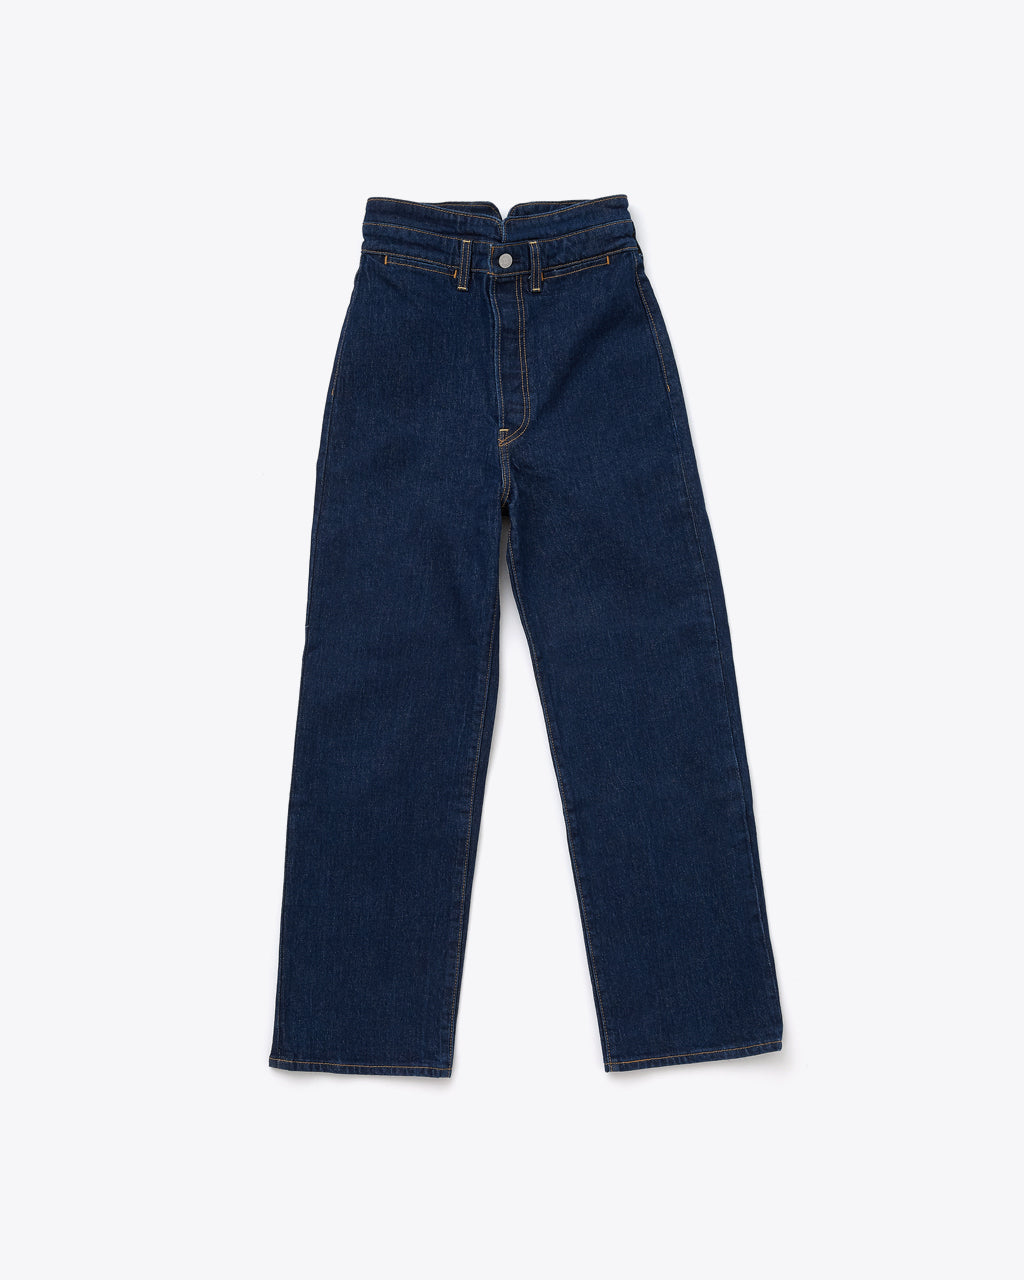 tailored levi jeans